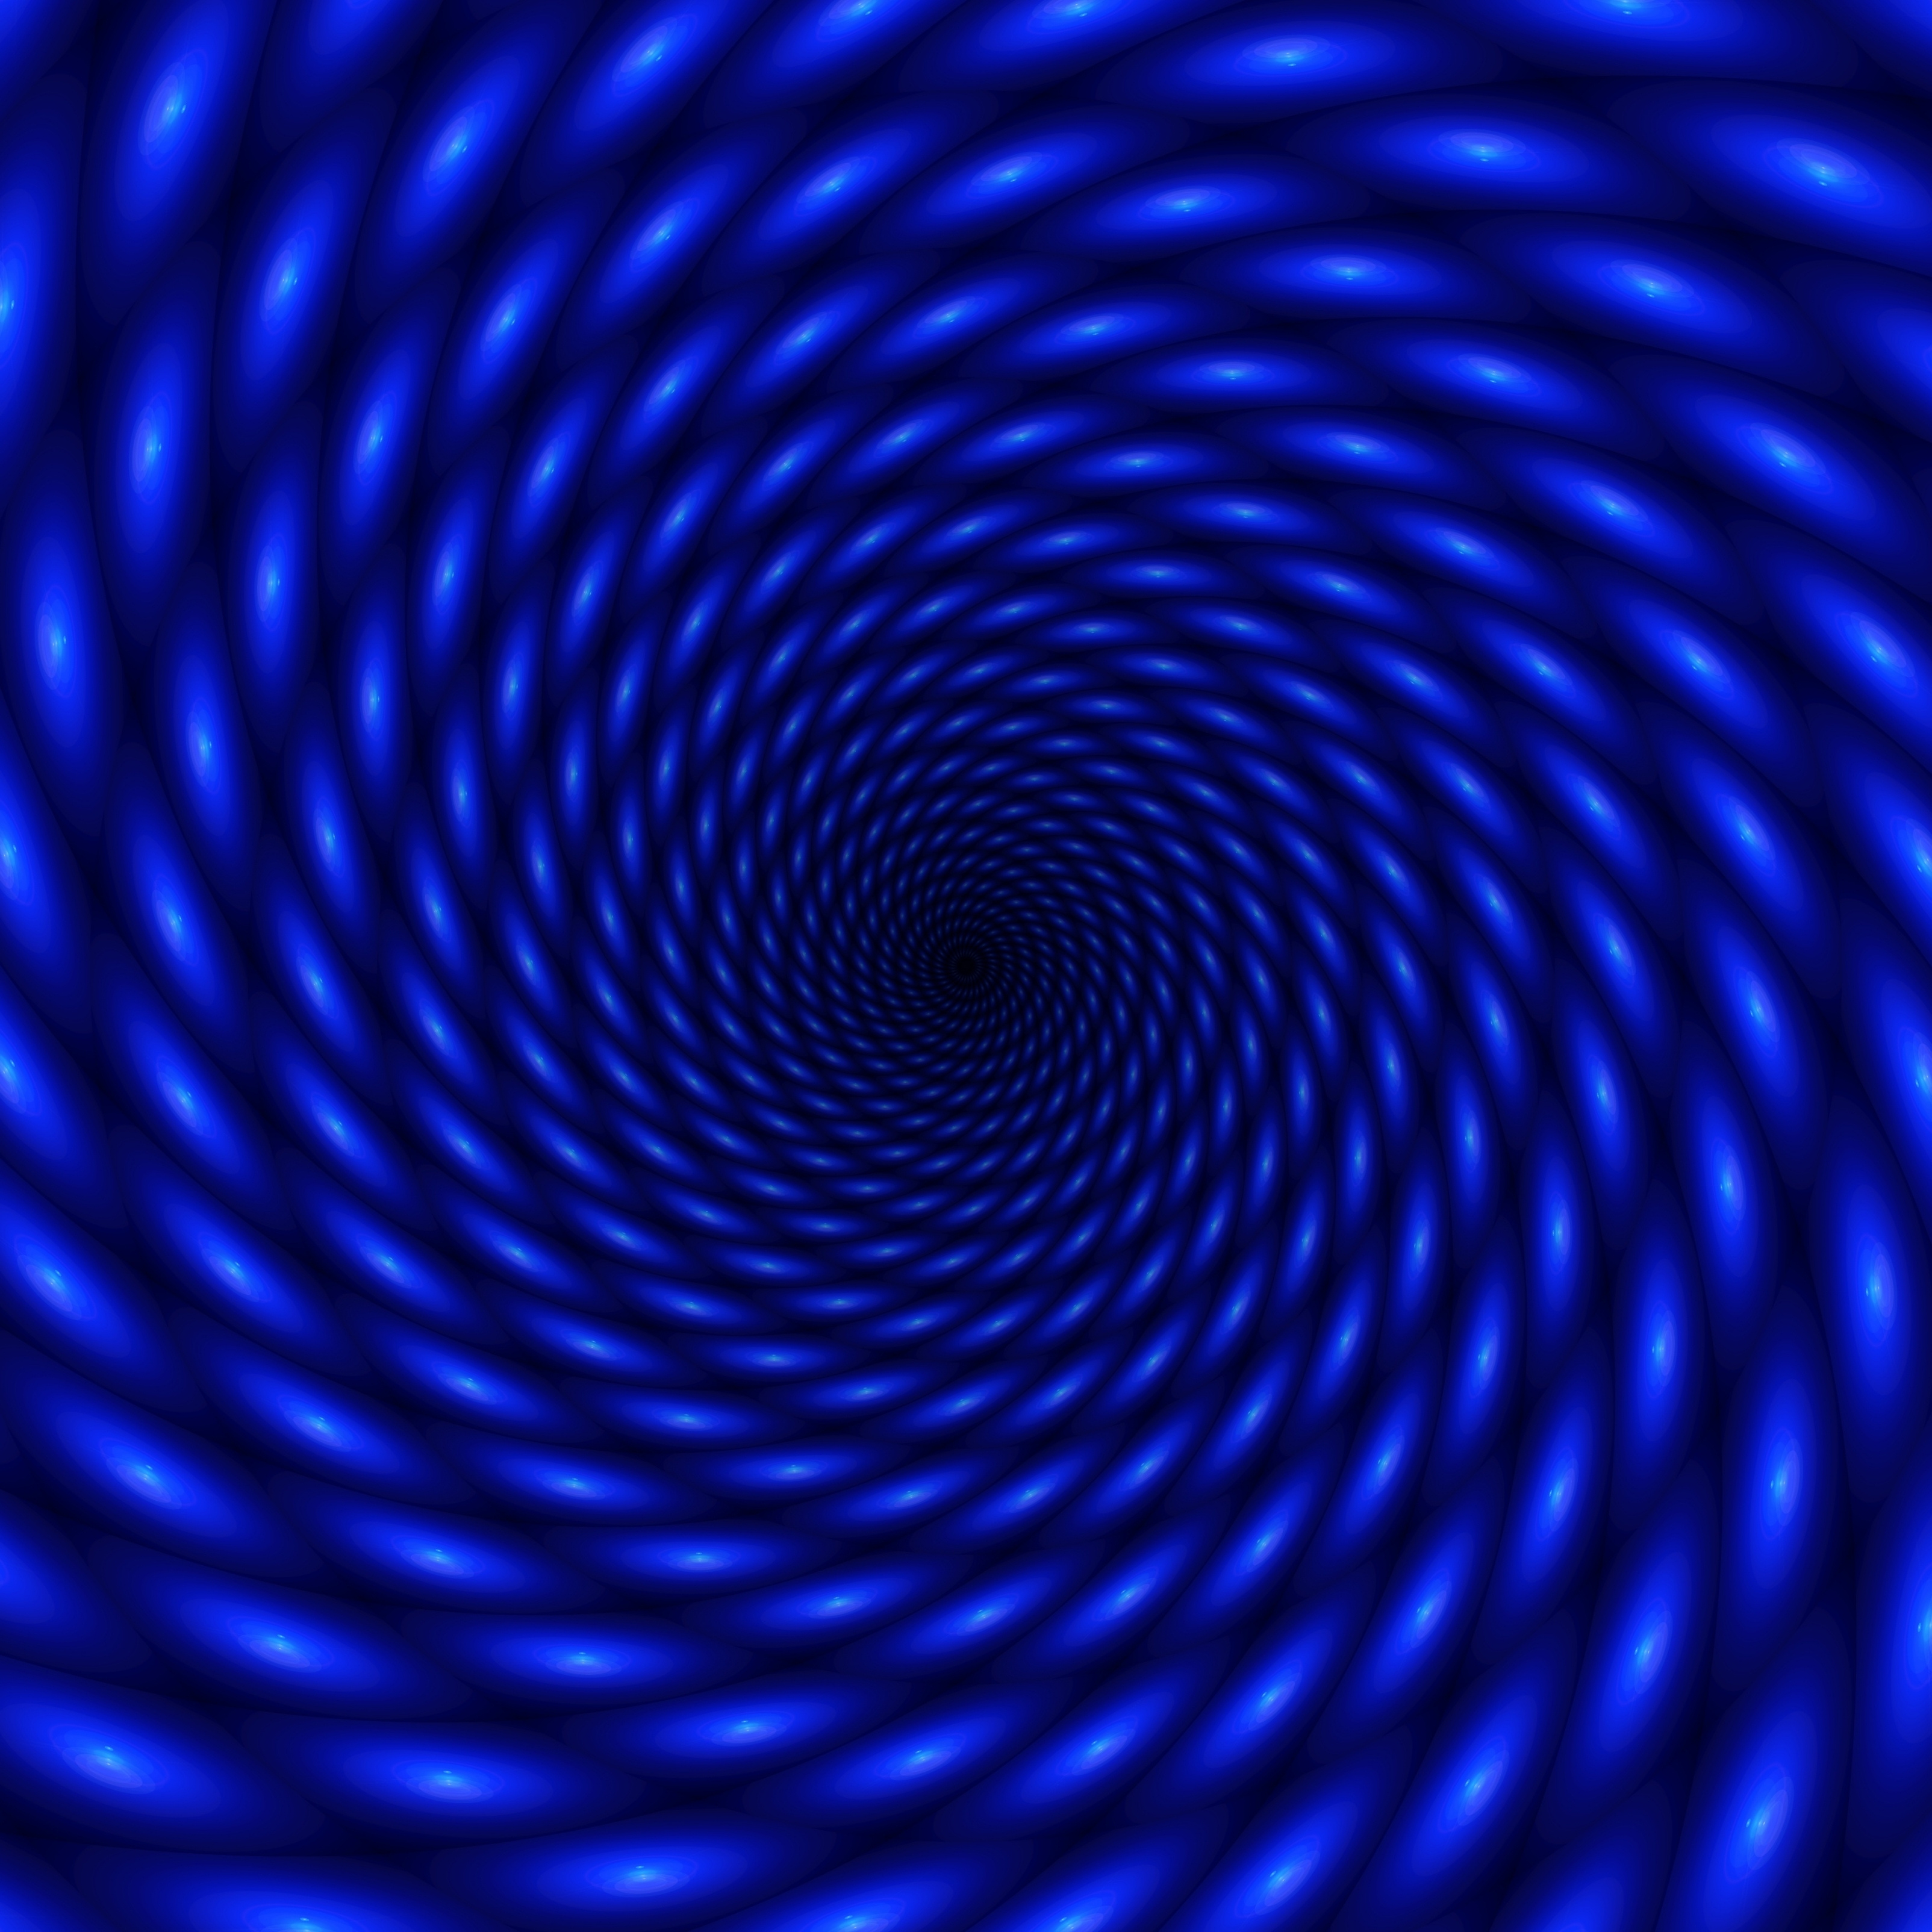 iPad Wallpapers Abstract Blue Spiral iPad Wallpaper 3208x3208 px